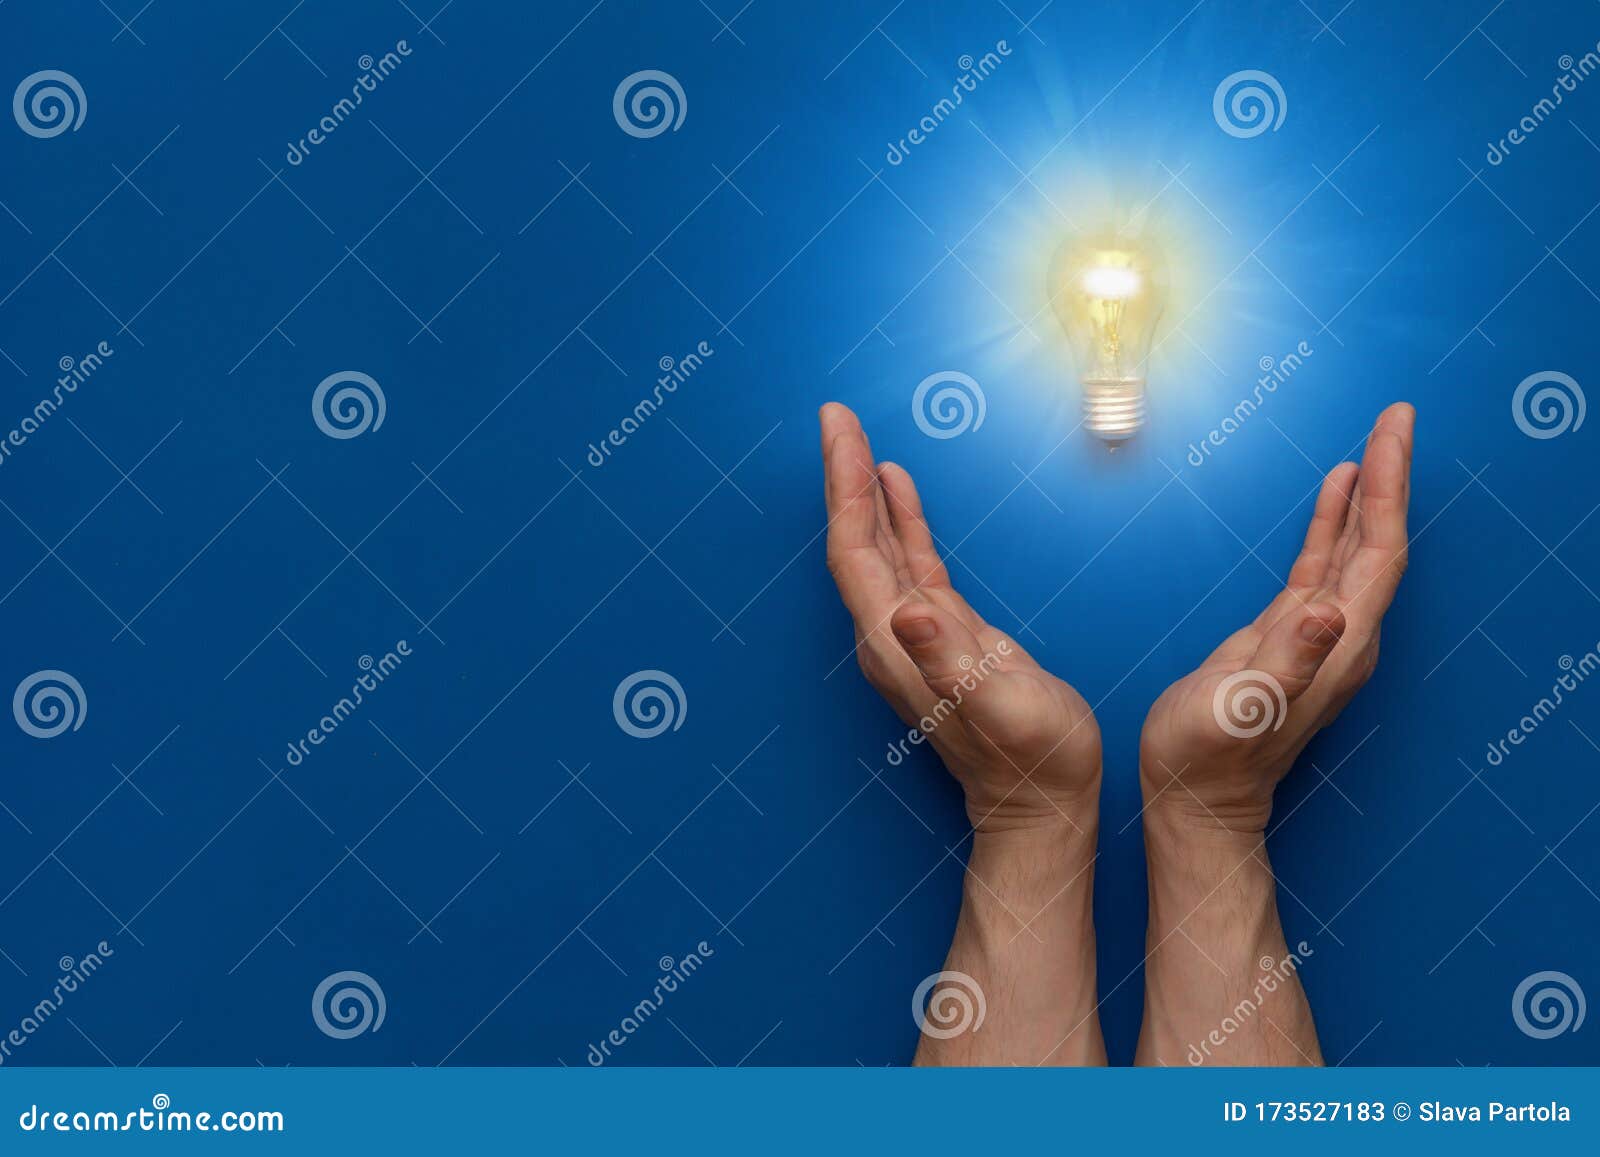 Hands Holding A Burning Light Bulb On A Blue Stock Image ...